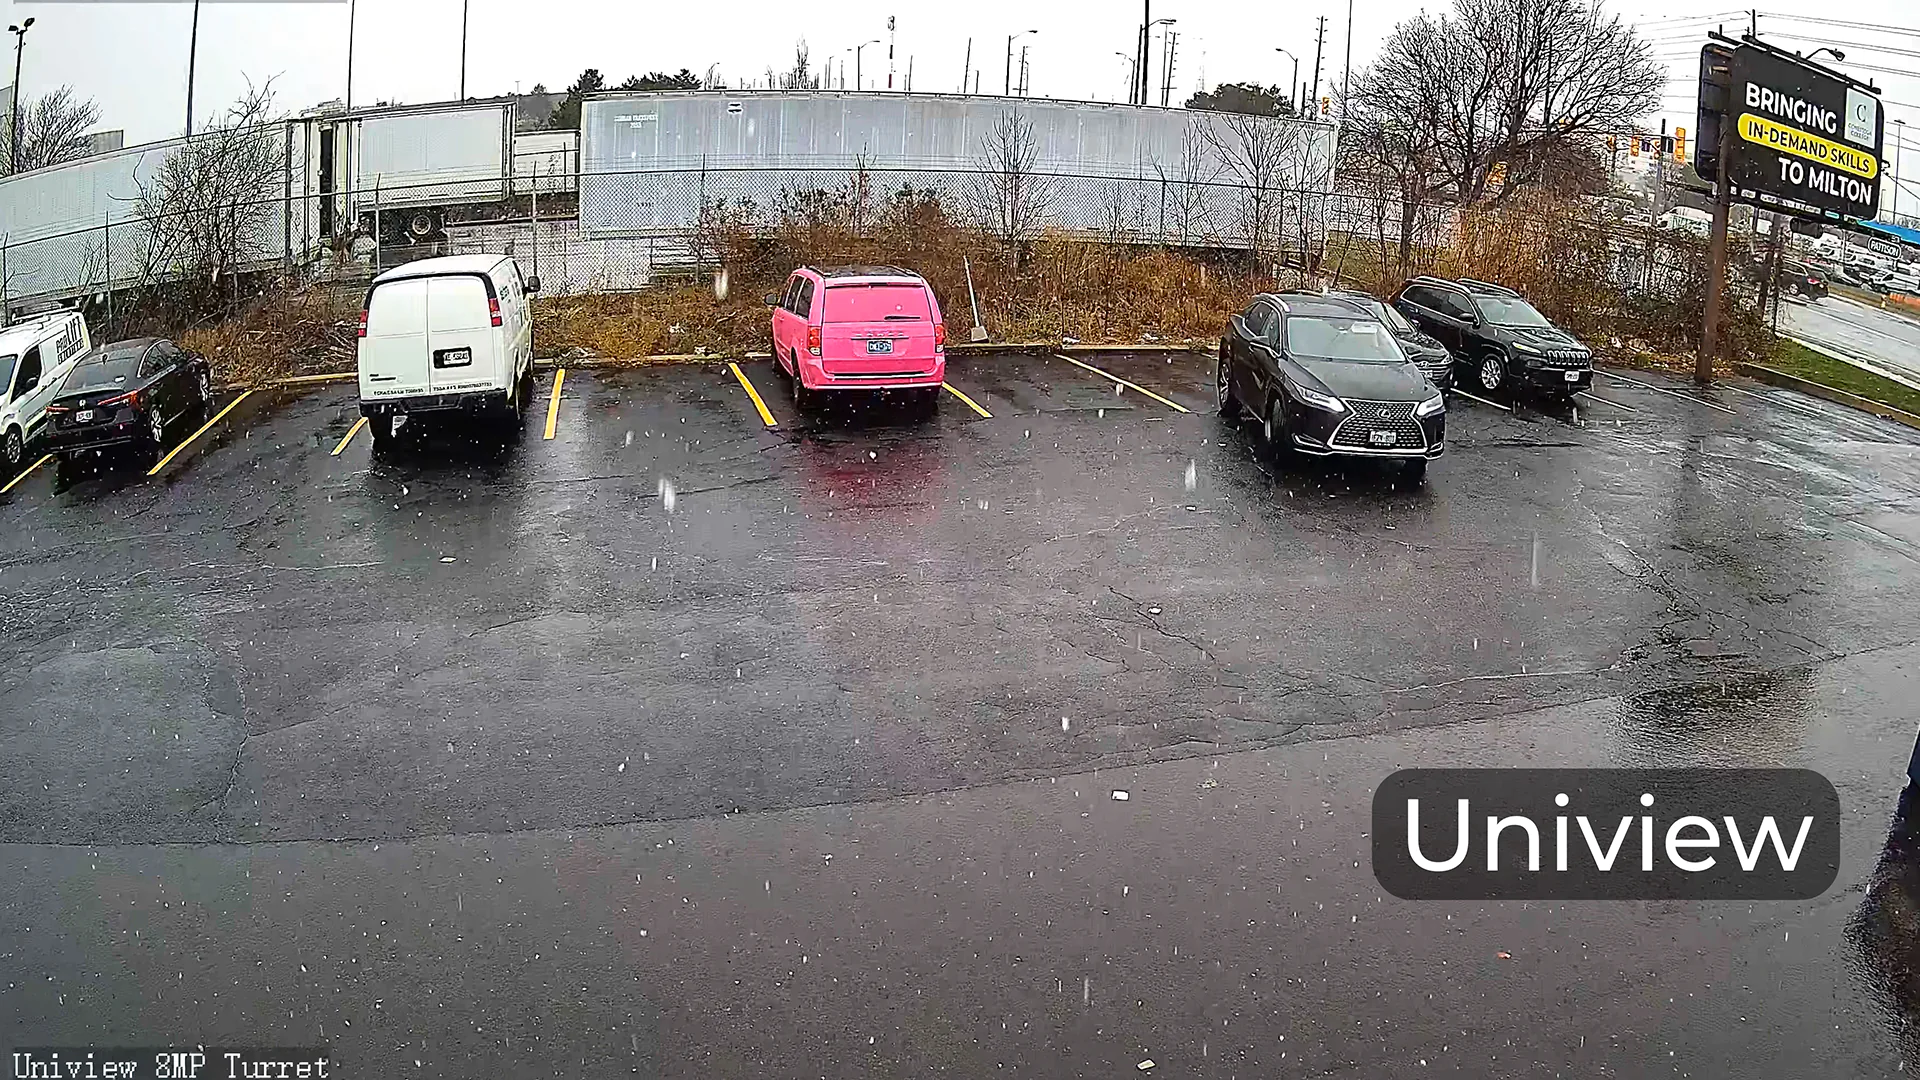 A snowy parking lot captured by a Uniview camera